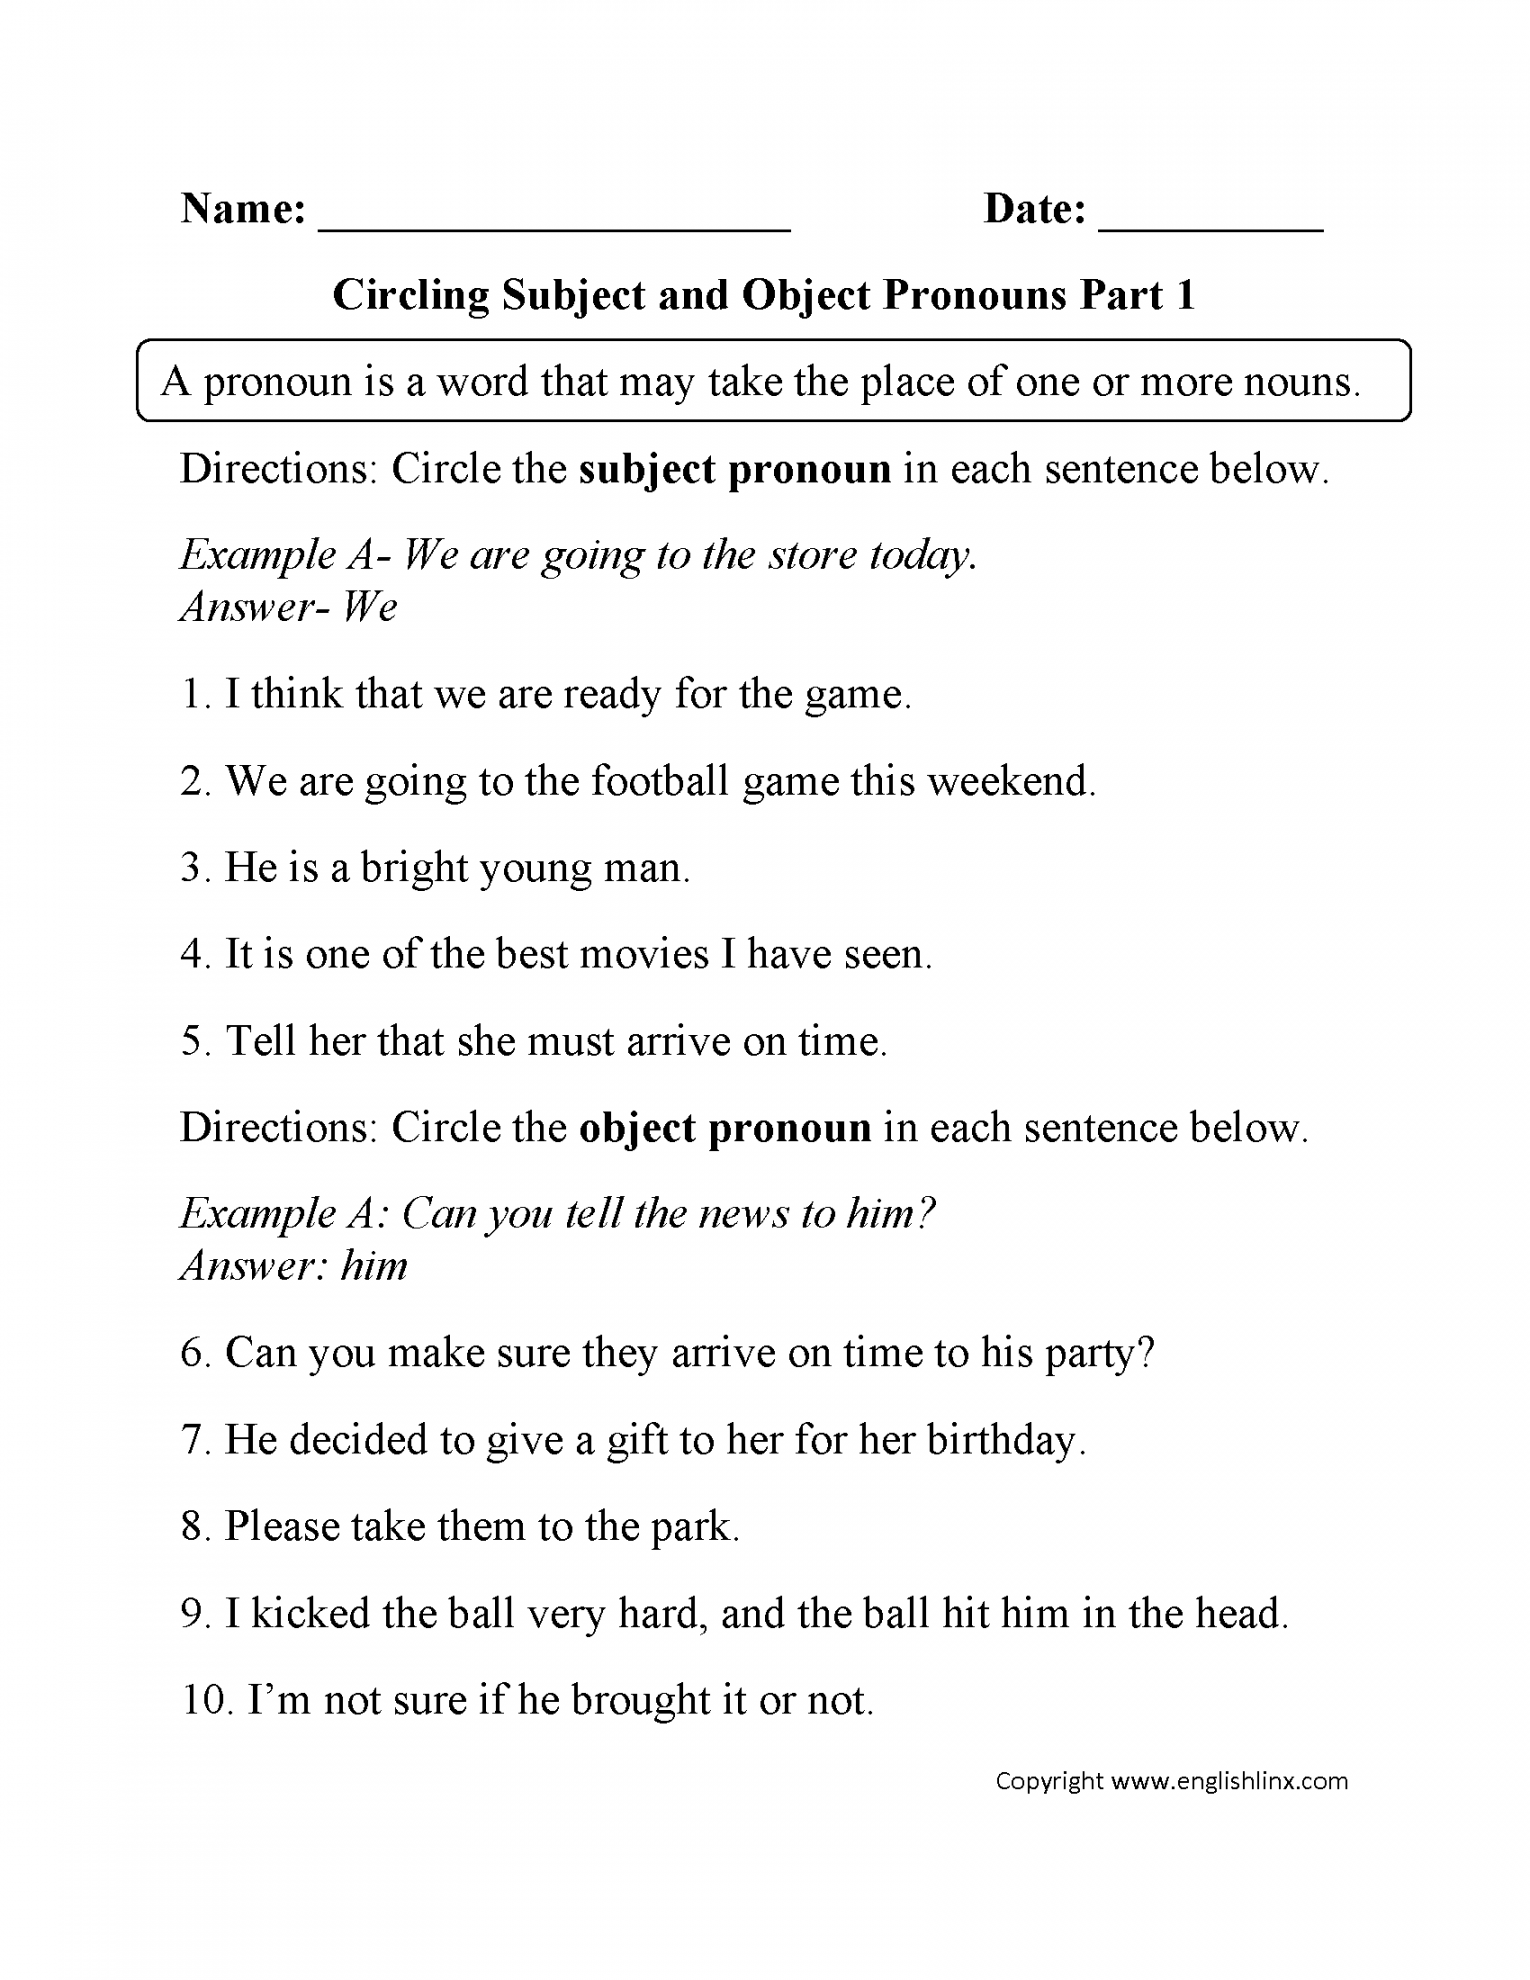 Pronouns Worksheets  Subject and Object Pronouns Worksheets